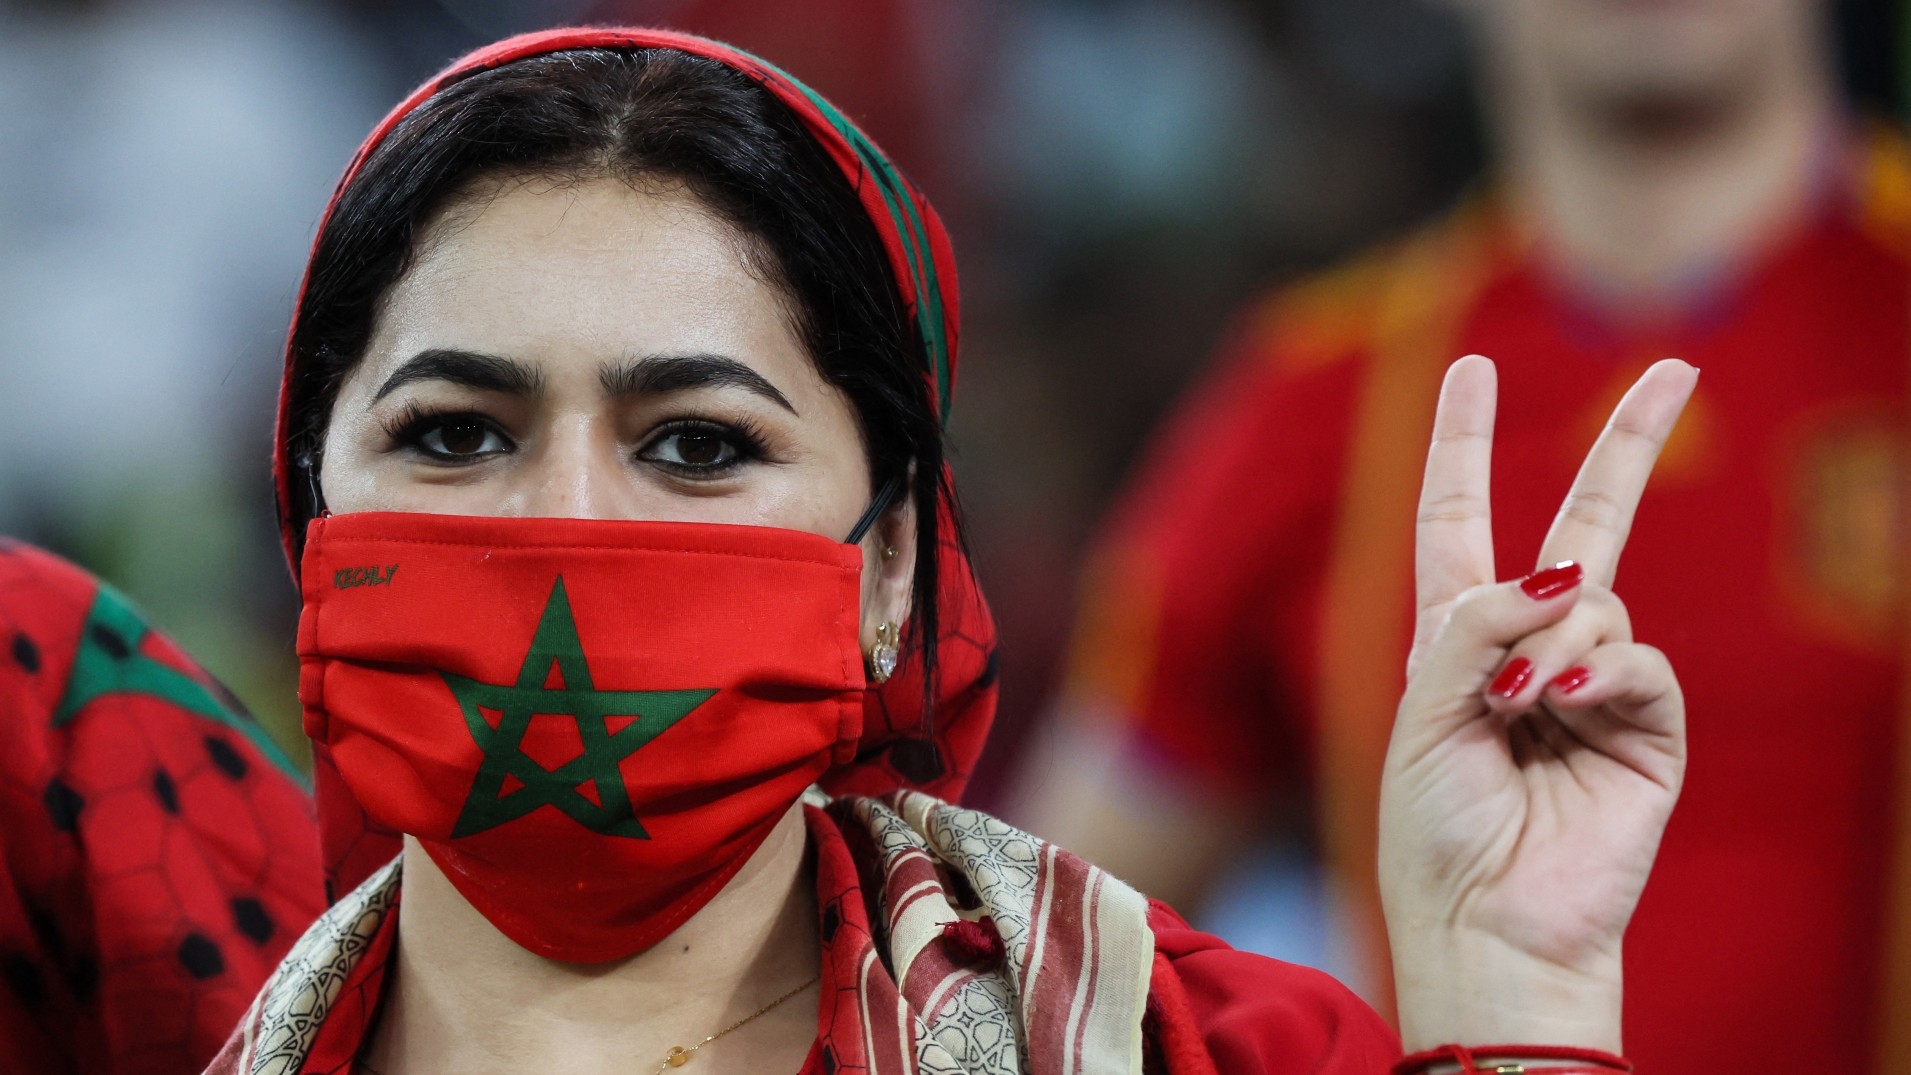 A Morocco supporter poses during the Qatar 2022 World Cup round of 16 football match against Spain in Al-Rayyan, west of Doha on 6 December 2022 (AFP)